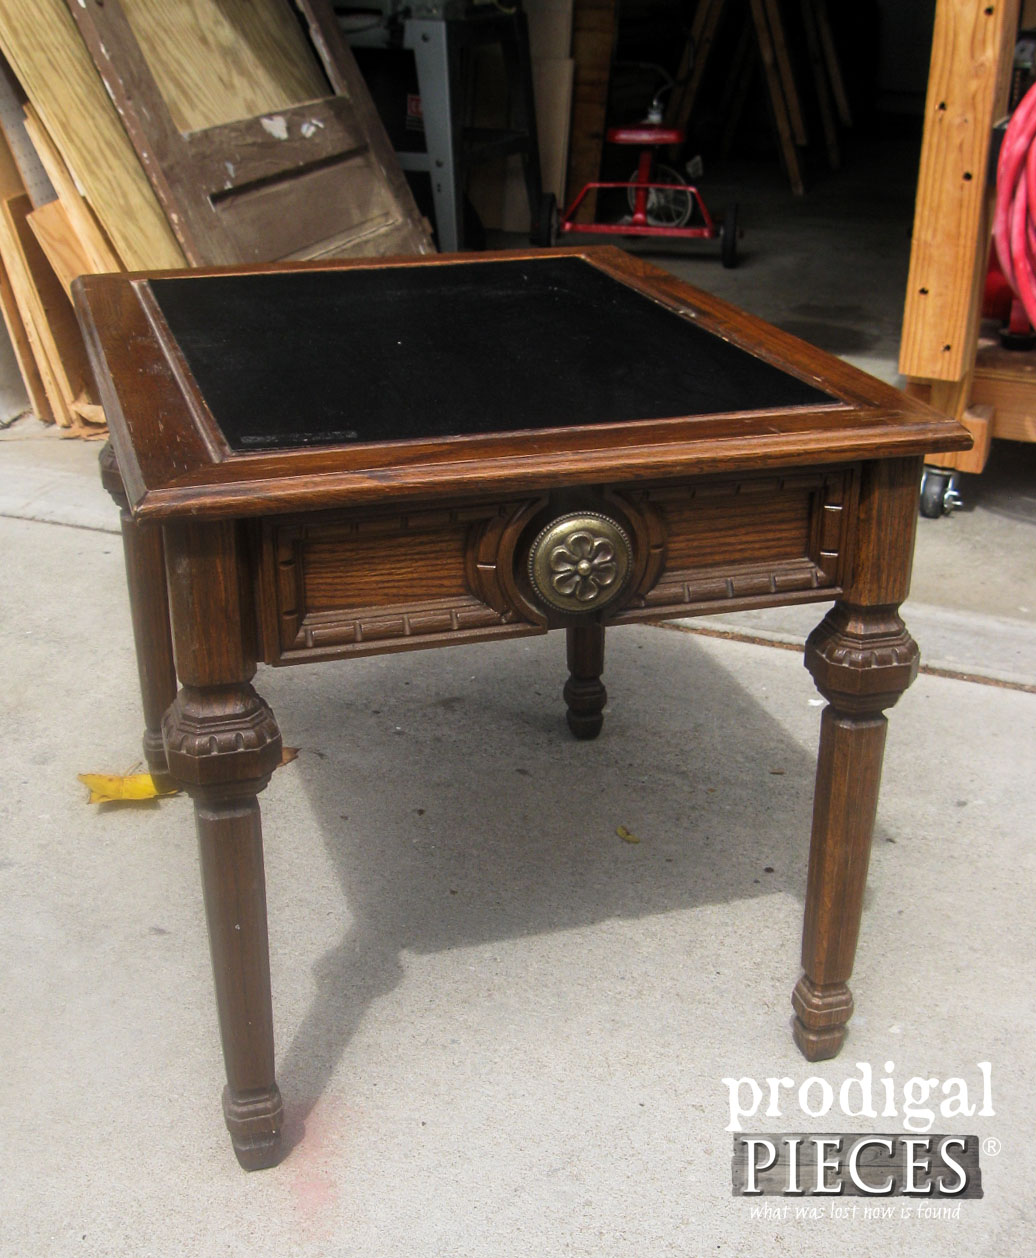 Vintage Mersman Side Table Before Makeover by Prodigal Pieces | www.prodigalpieces.com